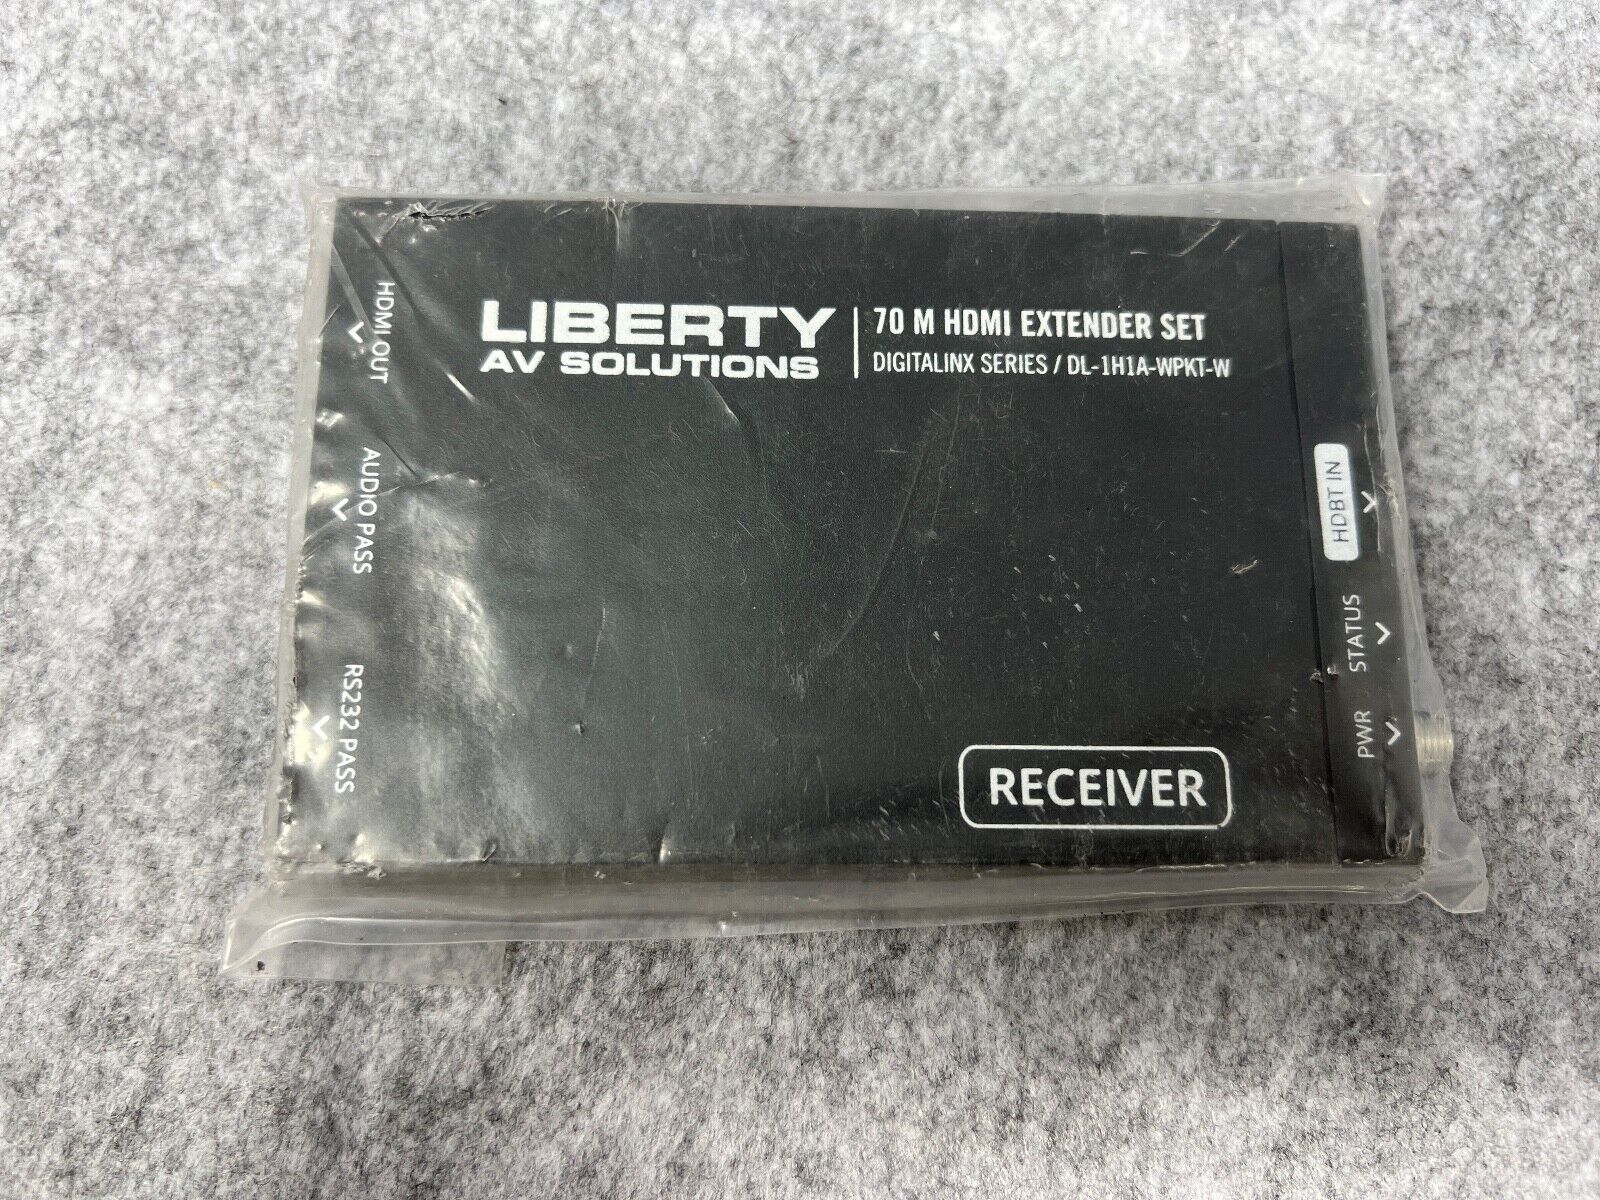 LIBERTY AV SOLUTIONS (DL-1H1A-WPKT-W) RECEIVER BOX -- [RECEIVER ONLY]